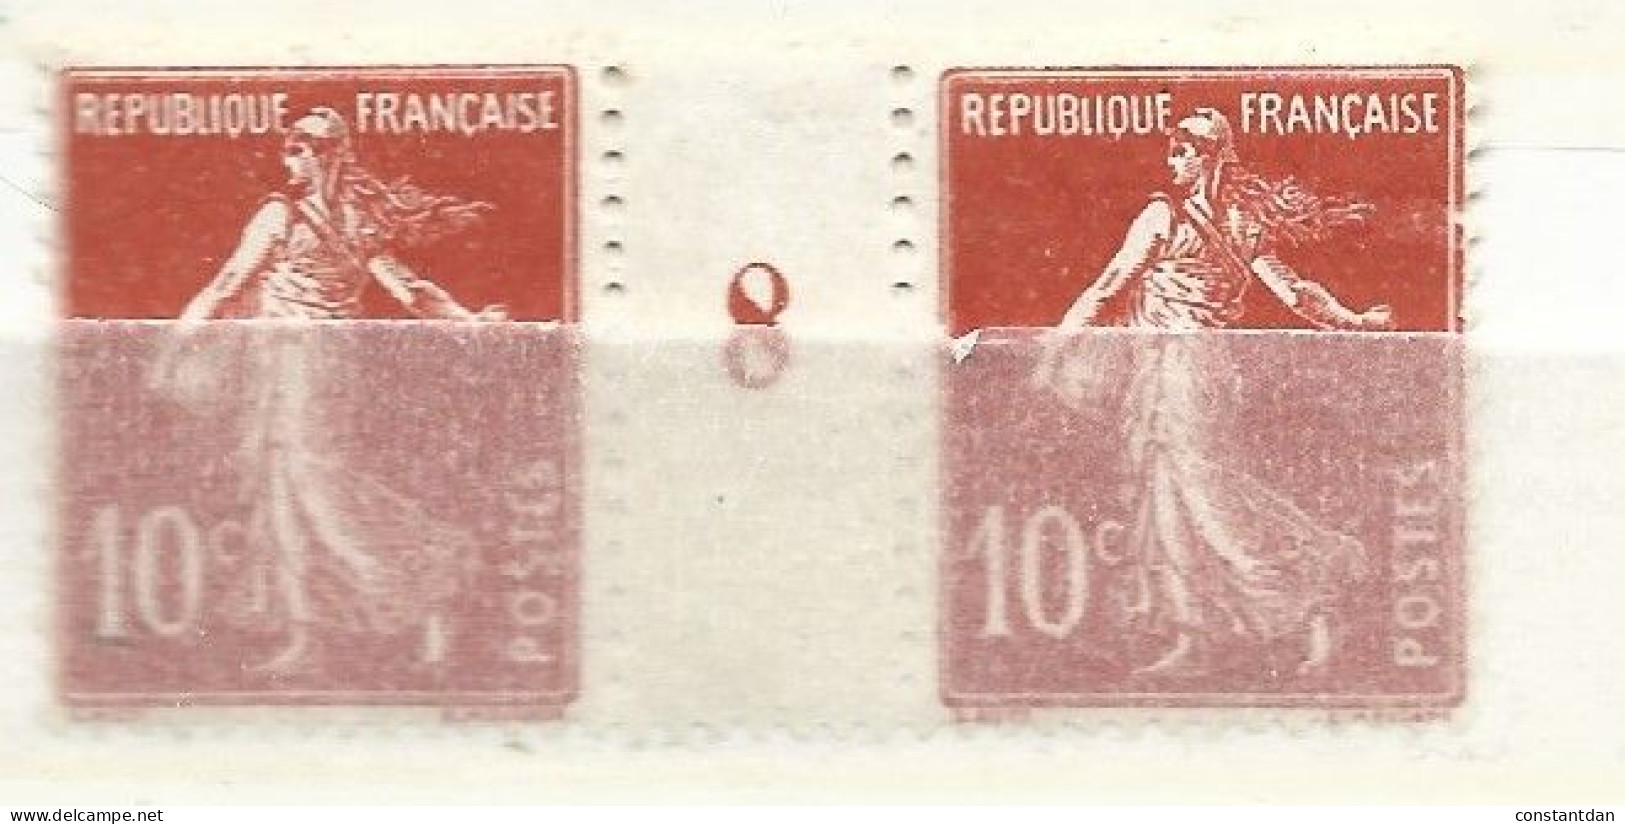 FRANCE N° 138 10C ROUGE TYPE SEMEUSE CAMEE MILLESIME 1908 NEUF CHARNIERE LEGERE - Millésime